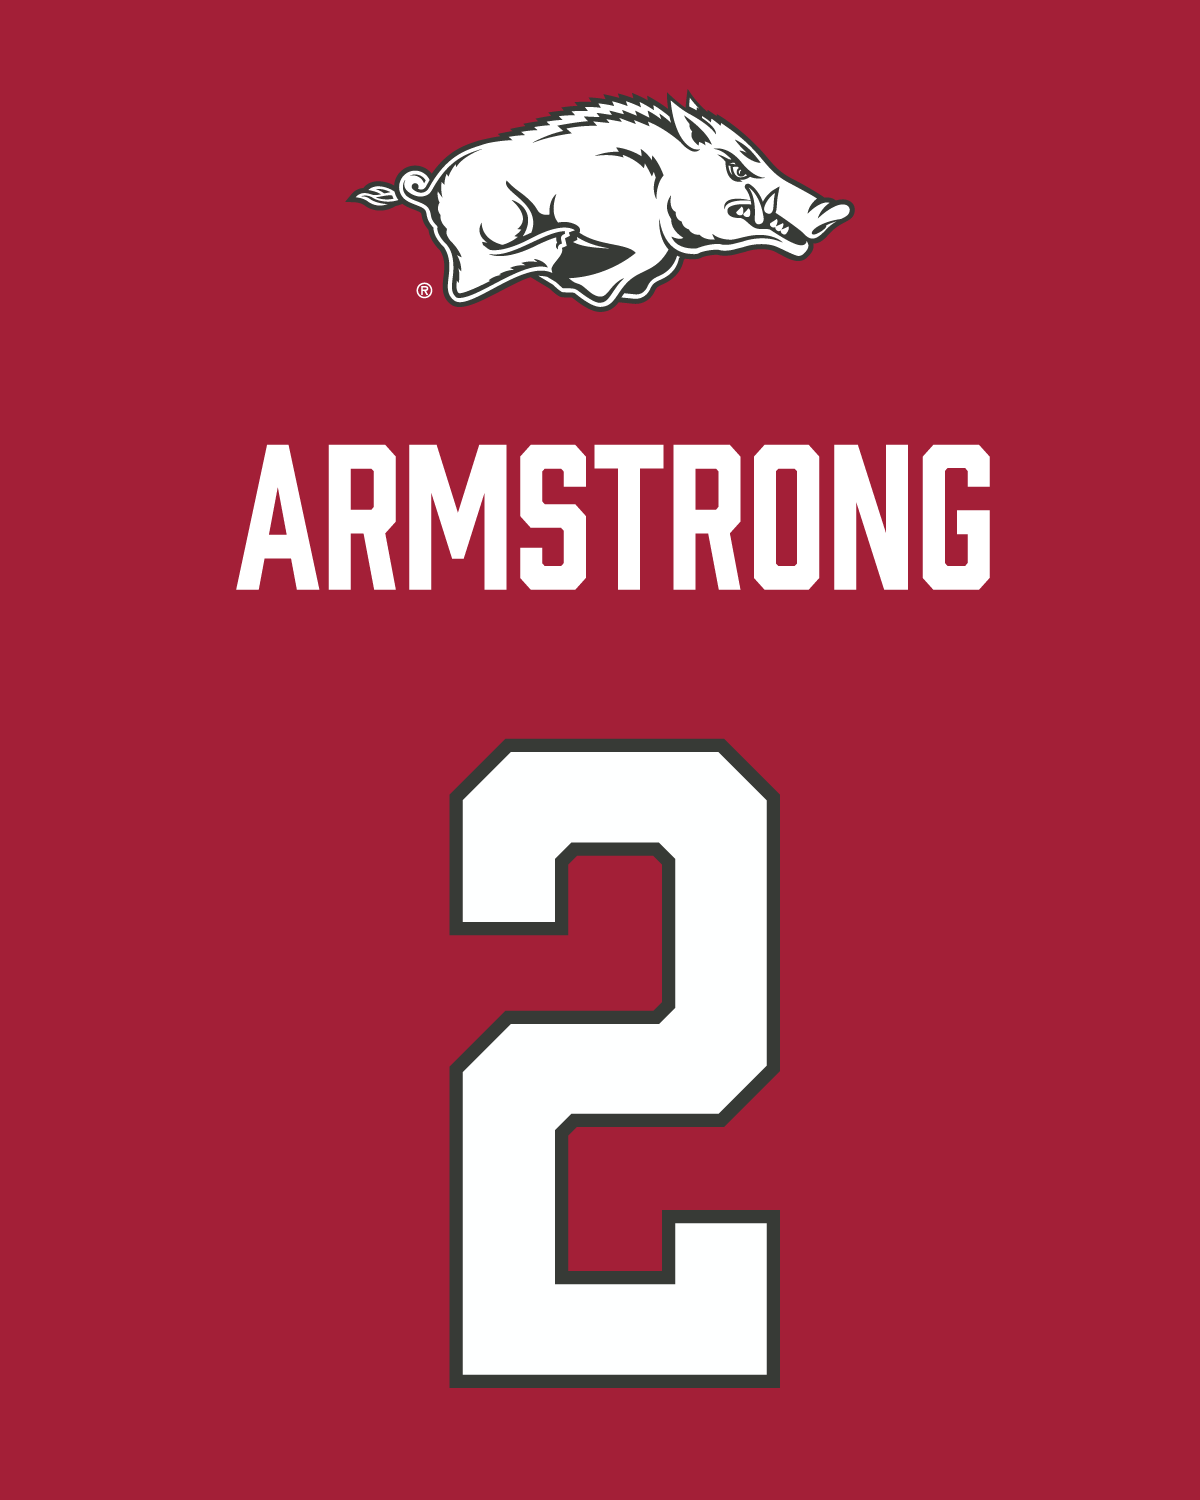 Andrew Armstrong | #2